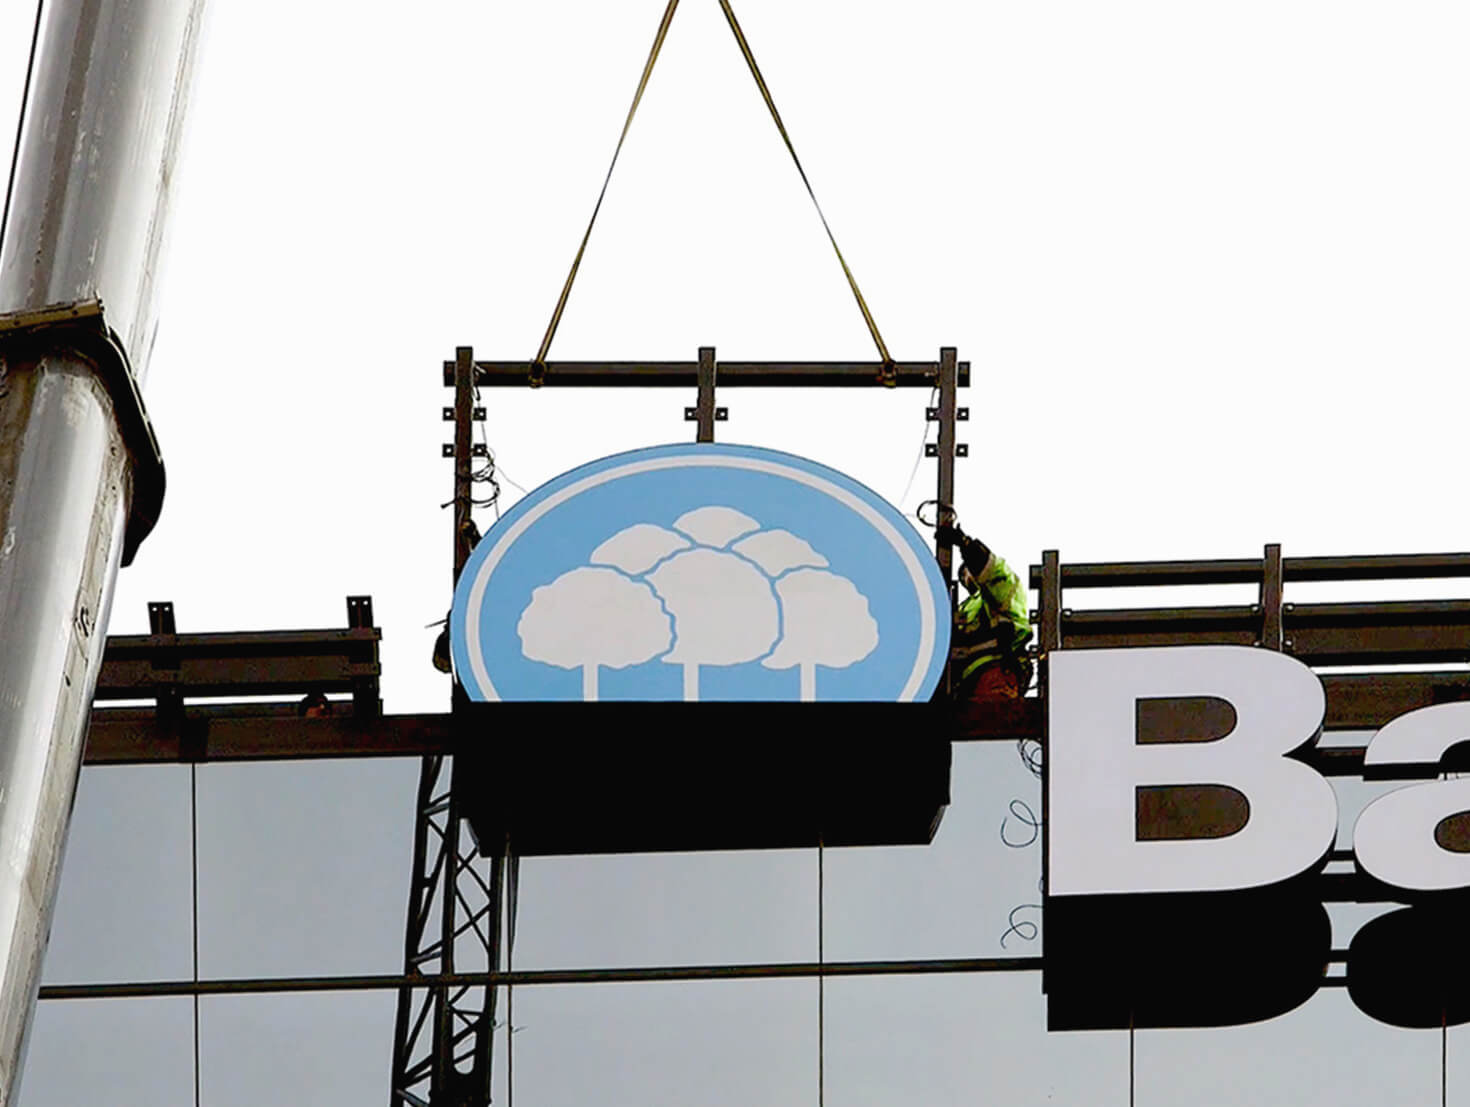 Installing Signage on Bell Bank high-rise in Bloomington MN